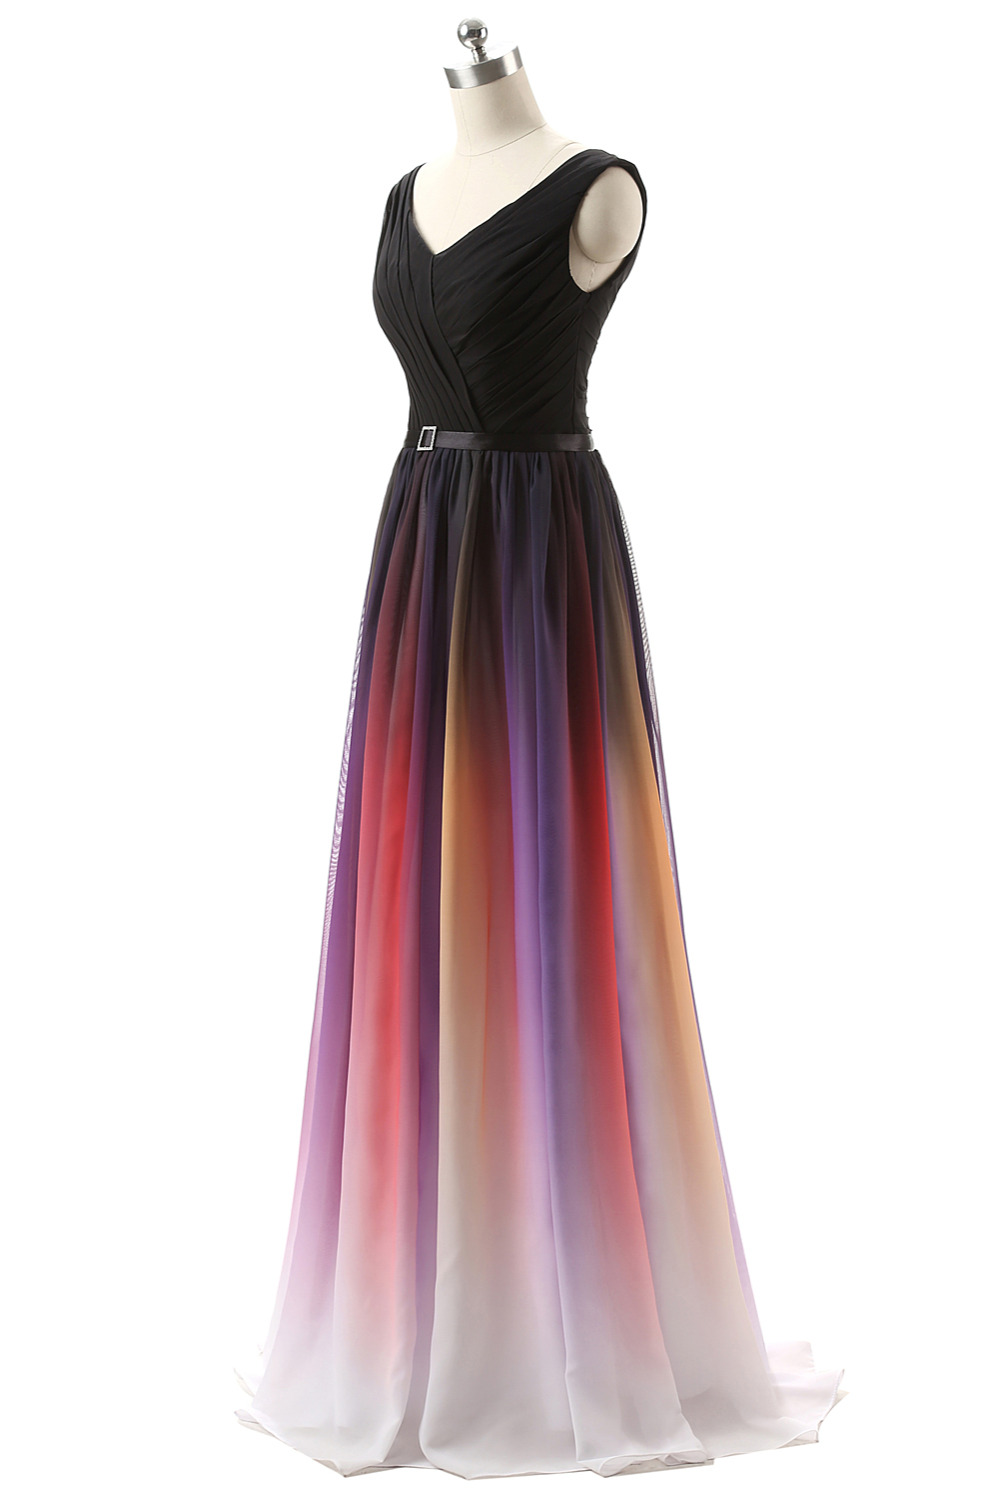 Women's Gradient Chiffon Formal Evening Dresses Long Party Prom Gown ...